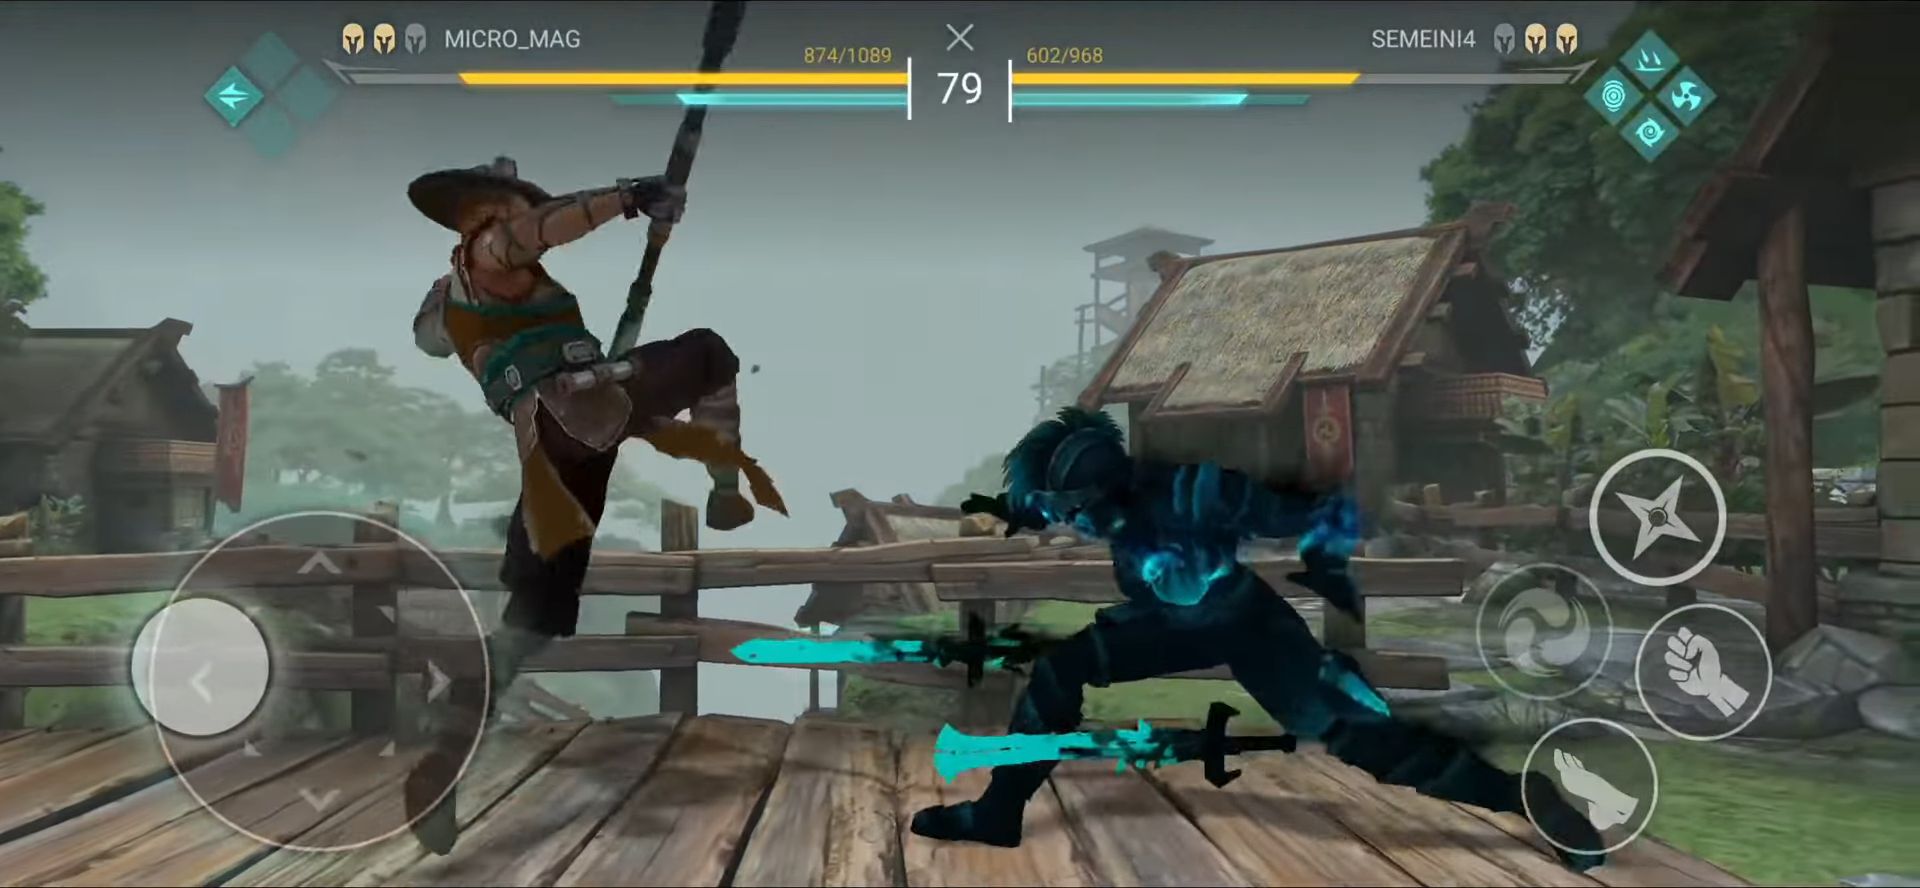 shadow fight 4 arena download download free